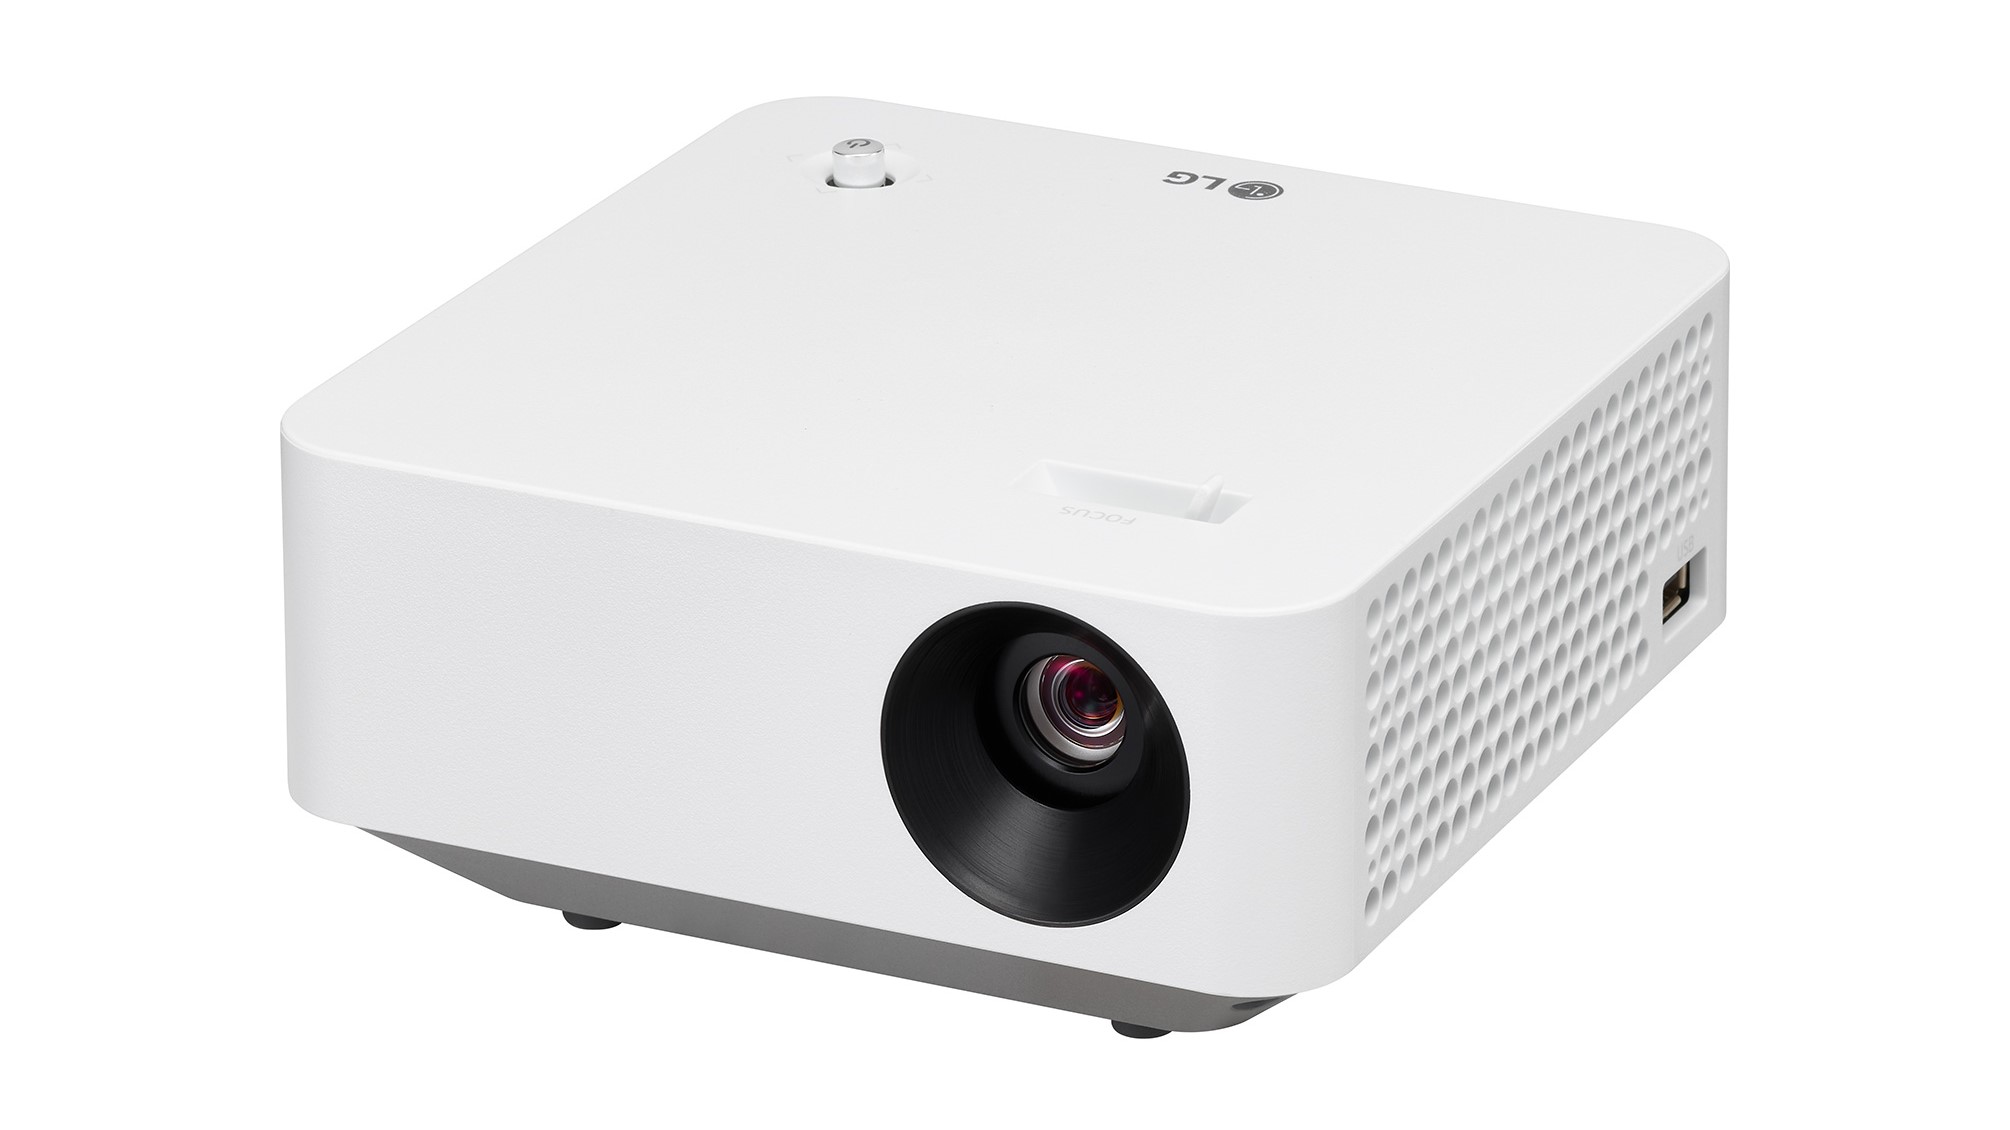 LG PF510Q projector on white background